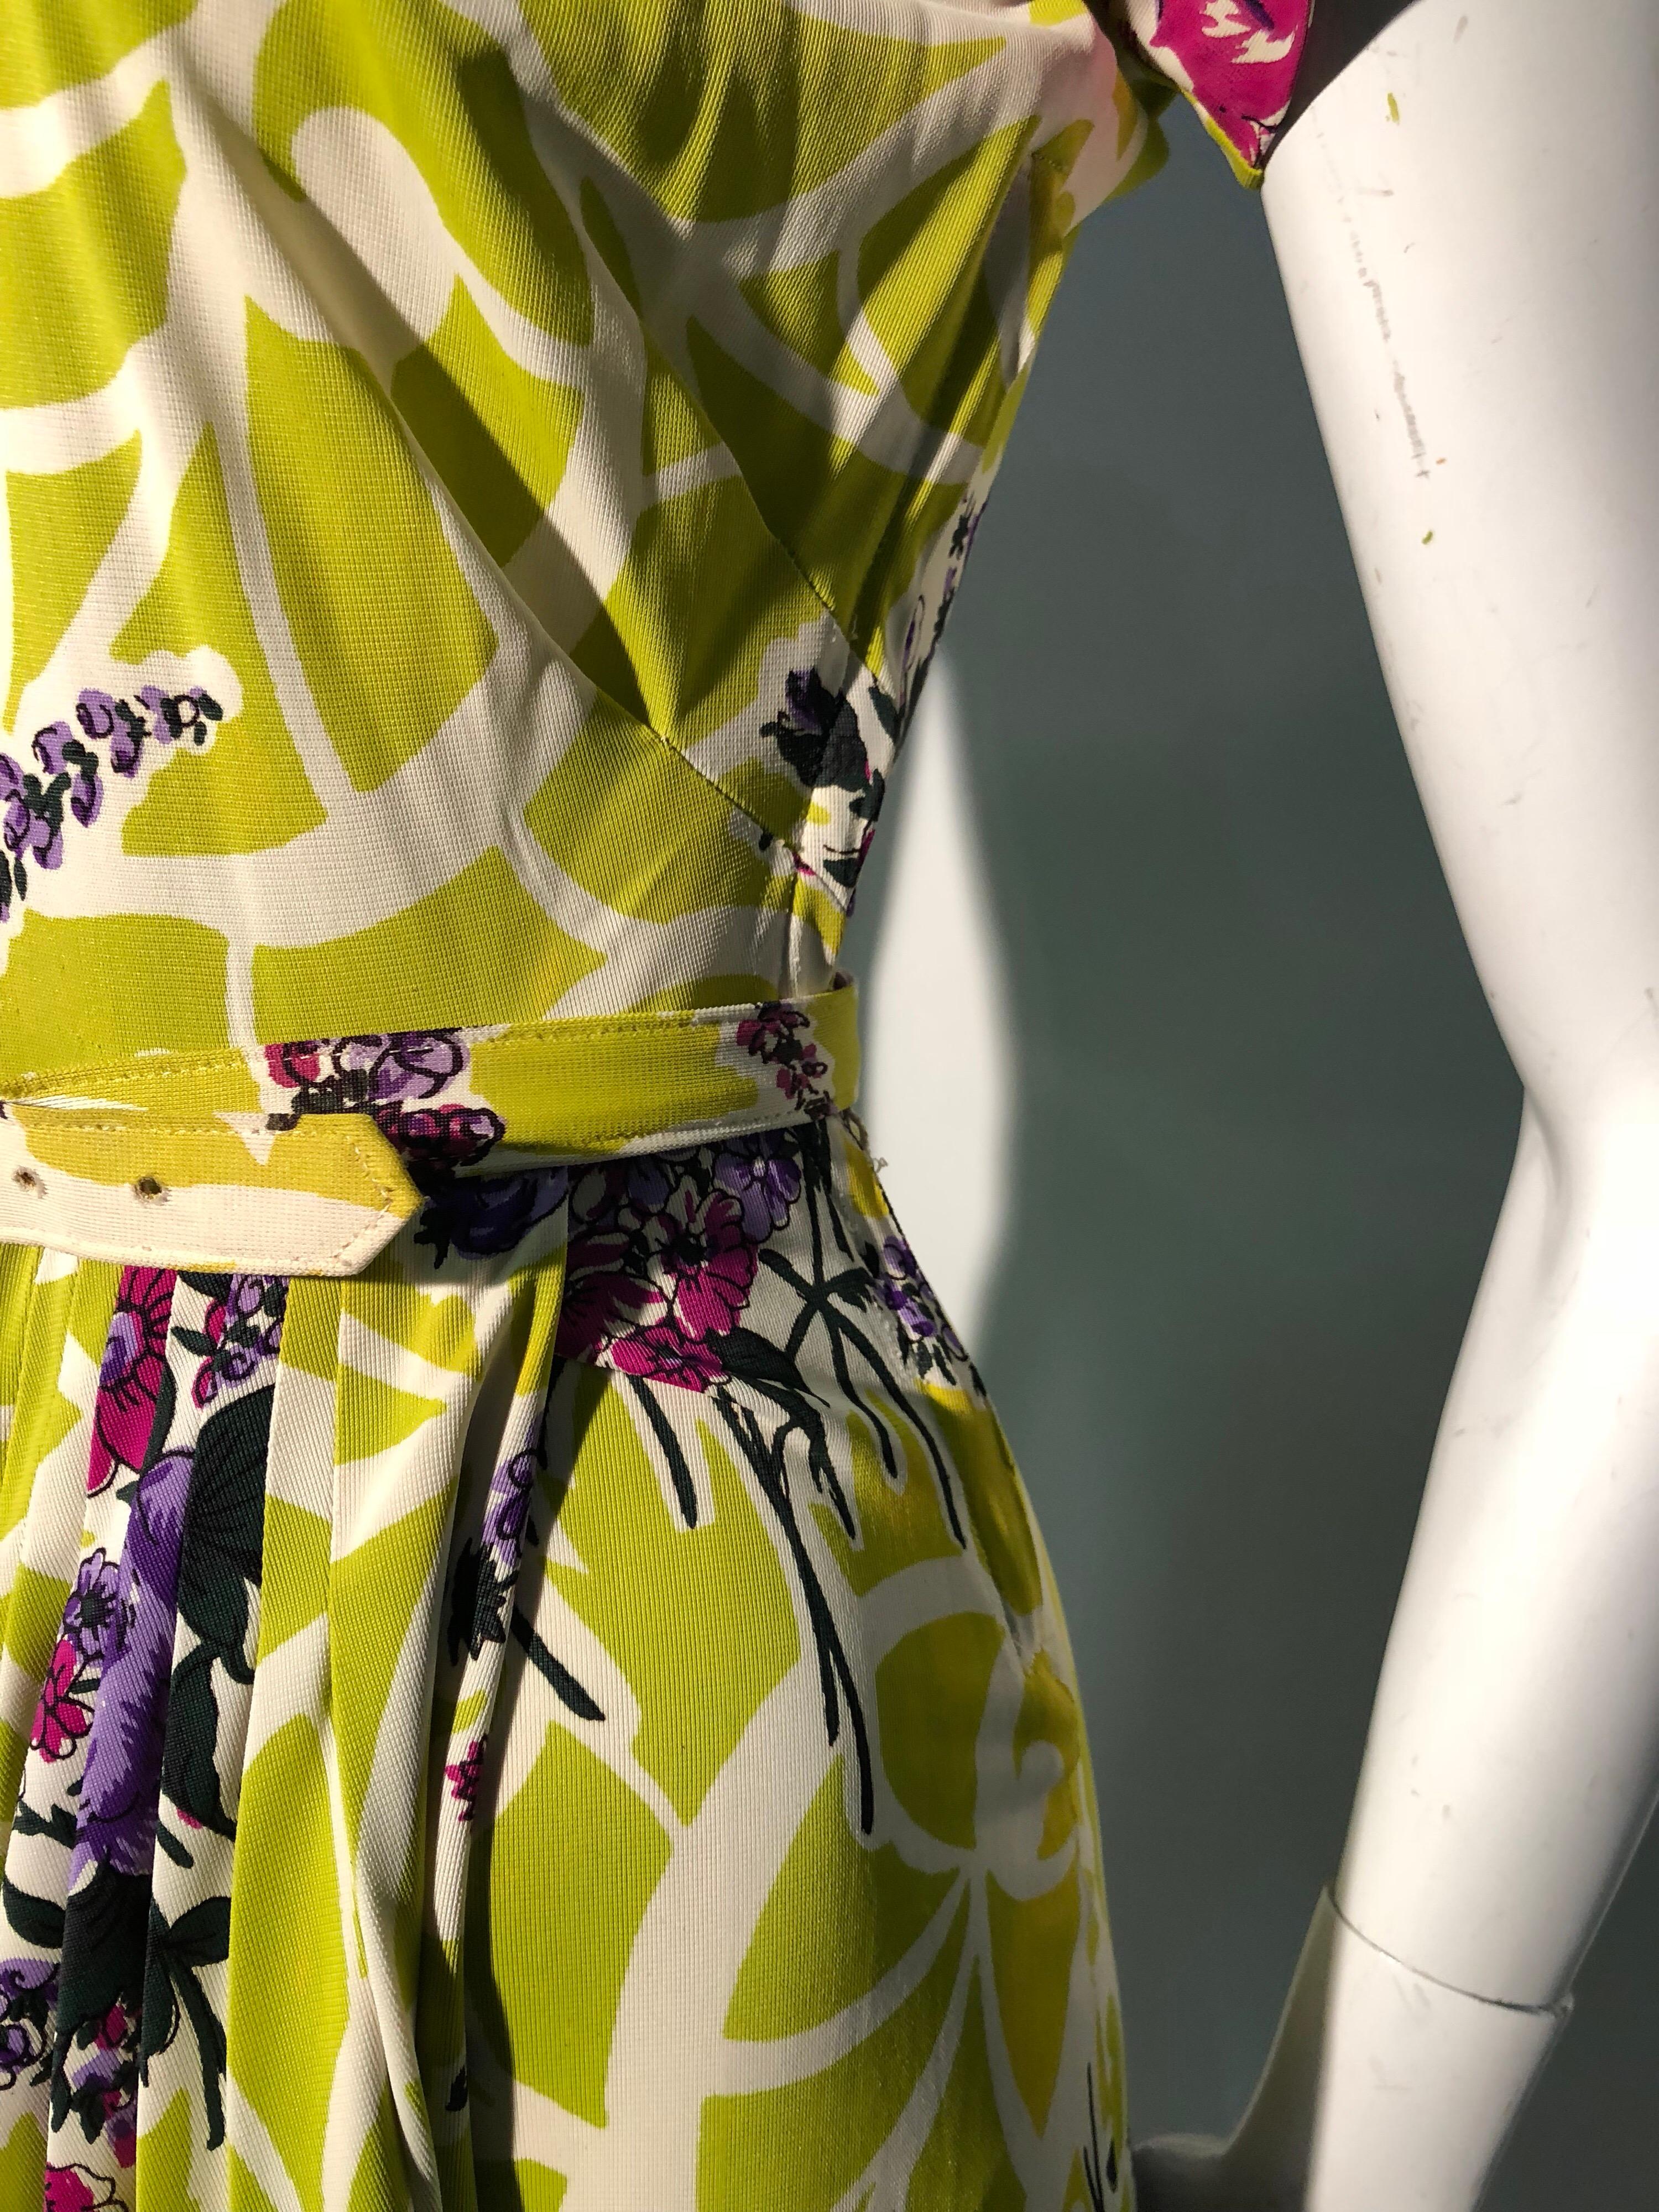 Incredible 1940s Nylon Jersey Swing Dress In A Spectacular Chartreuse and Floral For Sale 5